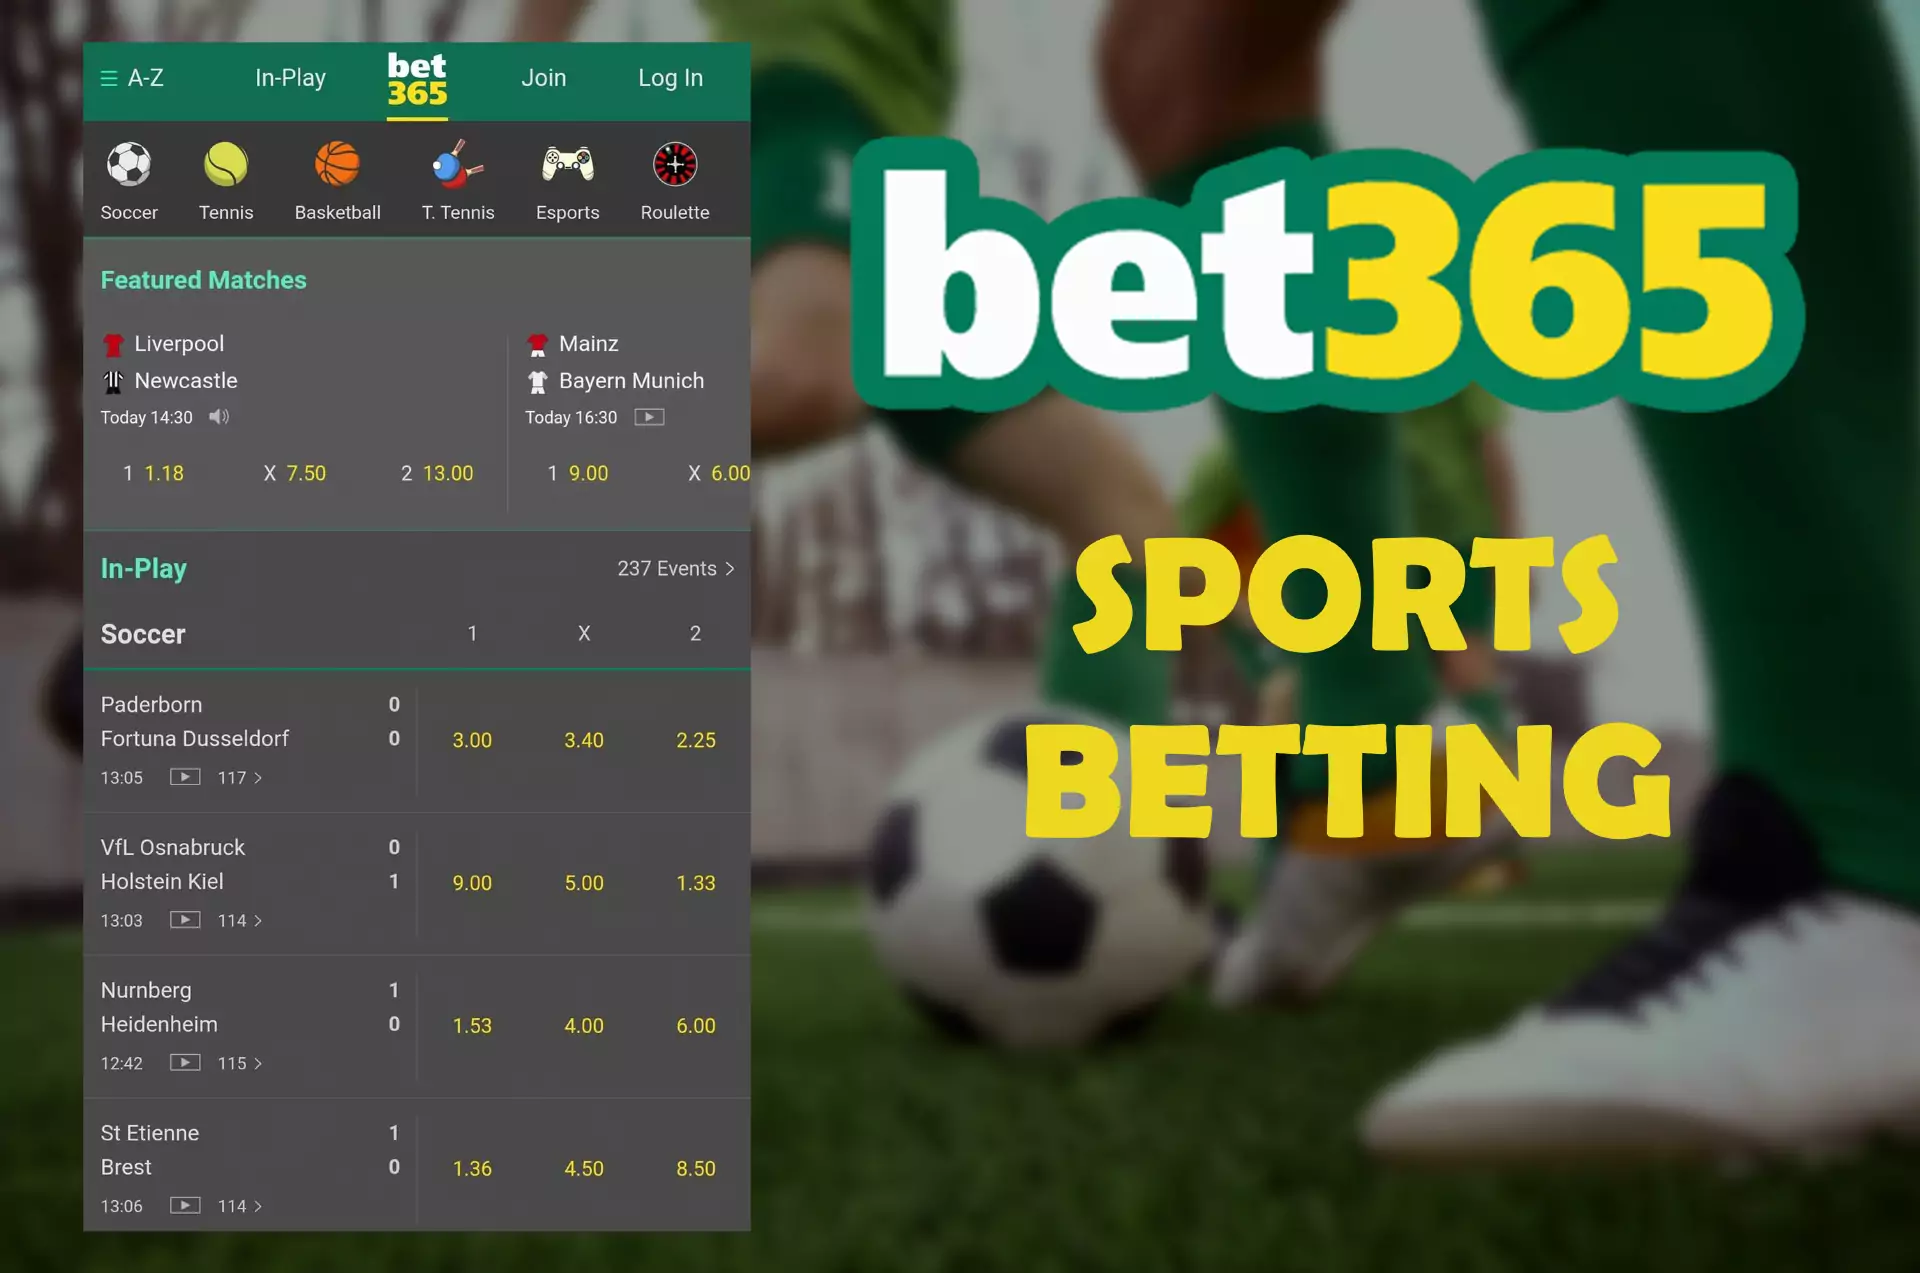 In the bet365 mobile app, users can bet on sports.